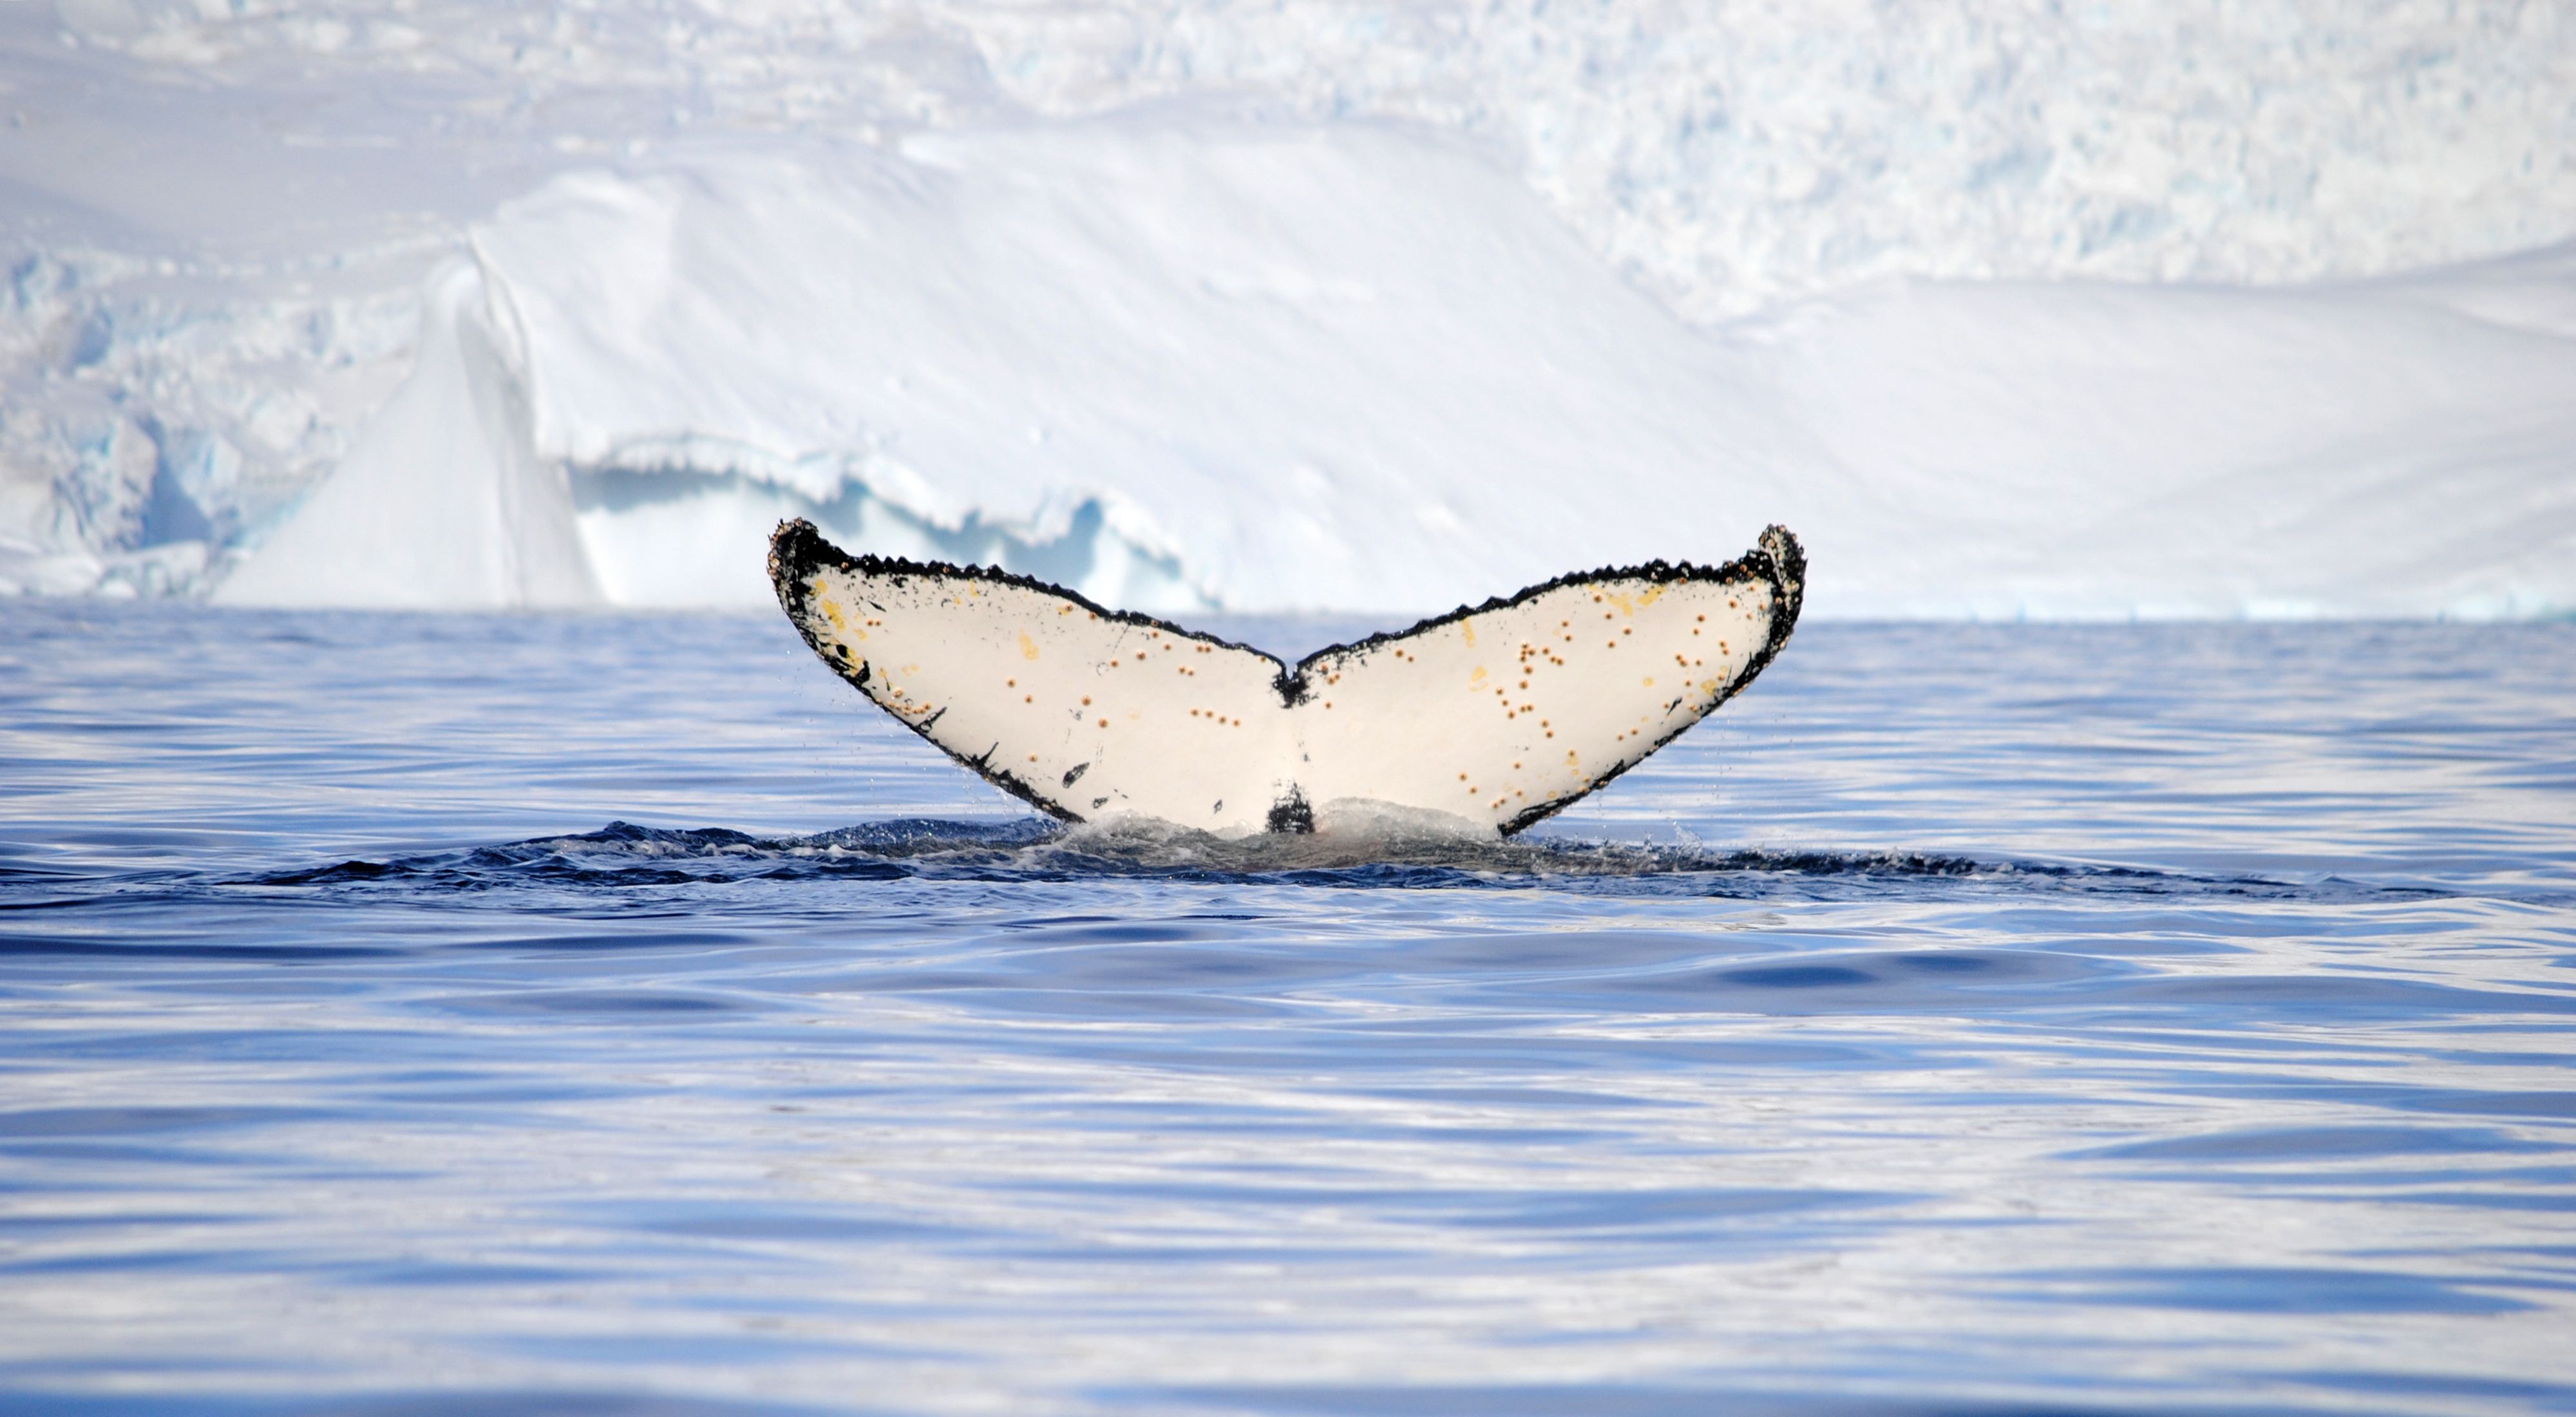 A whale's tale dips below the water in front of an iceberg in the Antarctic Ocean.